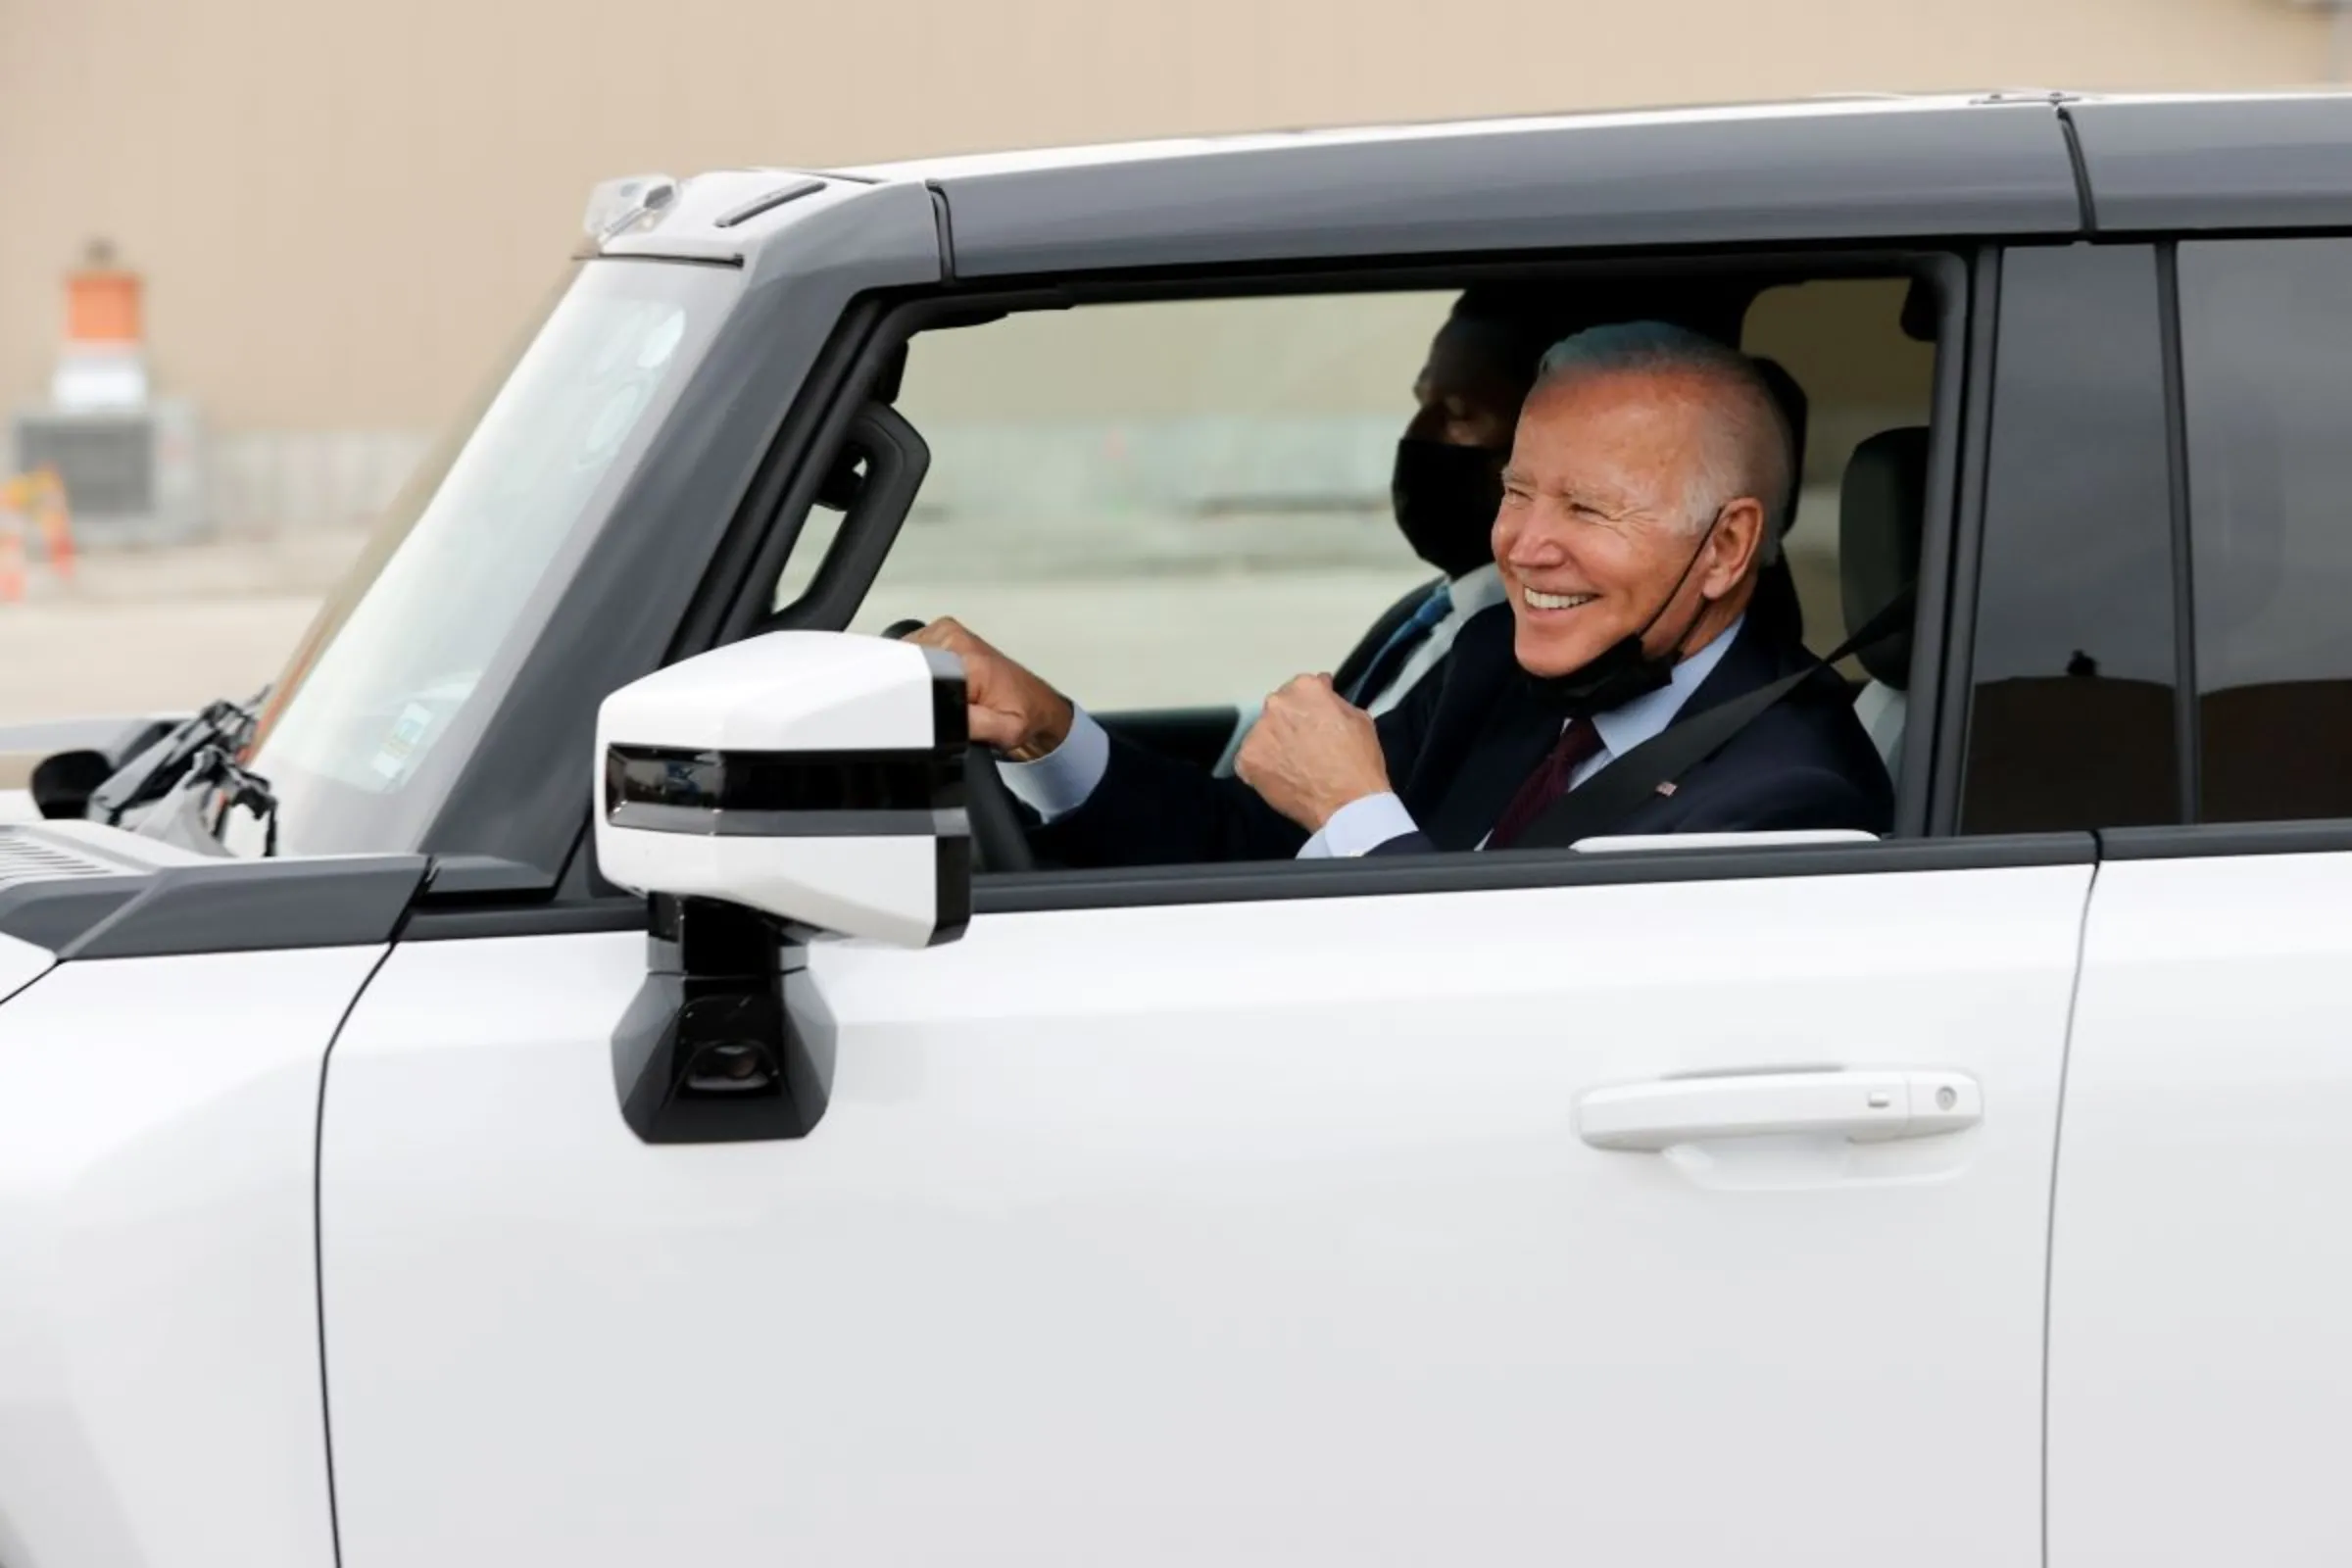 U.S. President Joe Biden gestures after driving a Hummer EV during a tour at the General Motors 'Factory ZERO' electric vehicle assembly plant in Detroit, Michigan, U.S. November 17, 2021